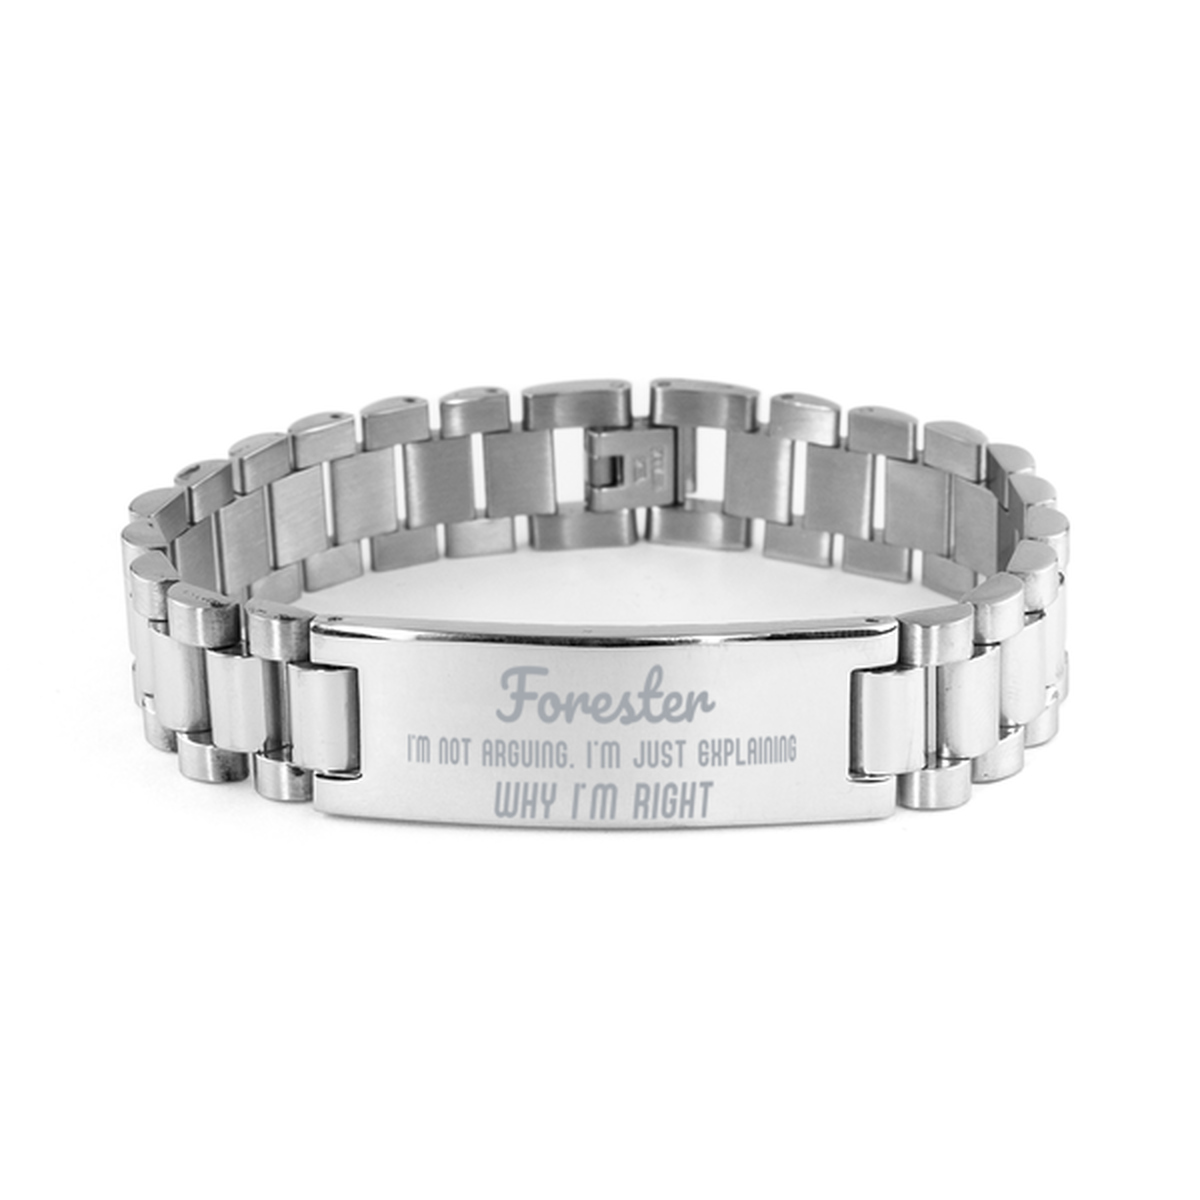 Forester I'm not Arguing. I'm Just Explaining Why I'm RIGHT Ladder Stainless Steel Bracelet, Graduation Birthday Christmas Forester Gifts For Forester Funny Saying Quote Present for Men Women Coworker